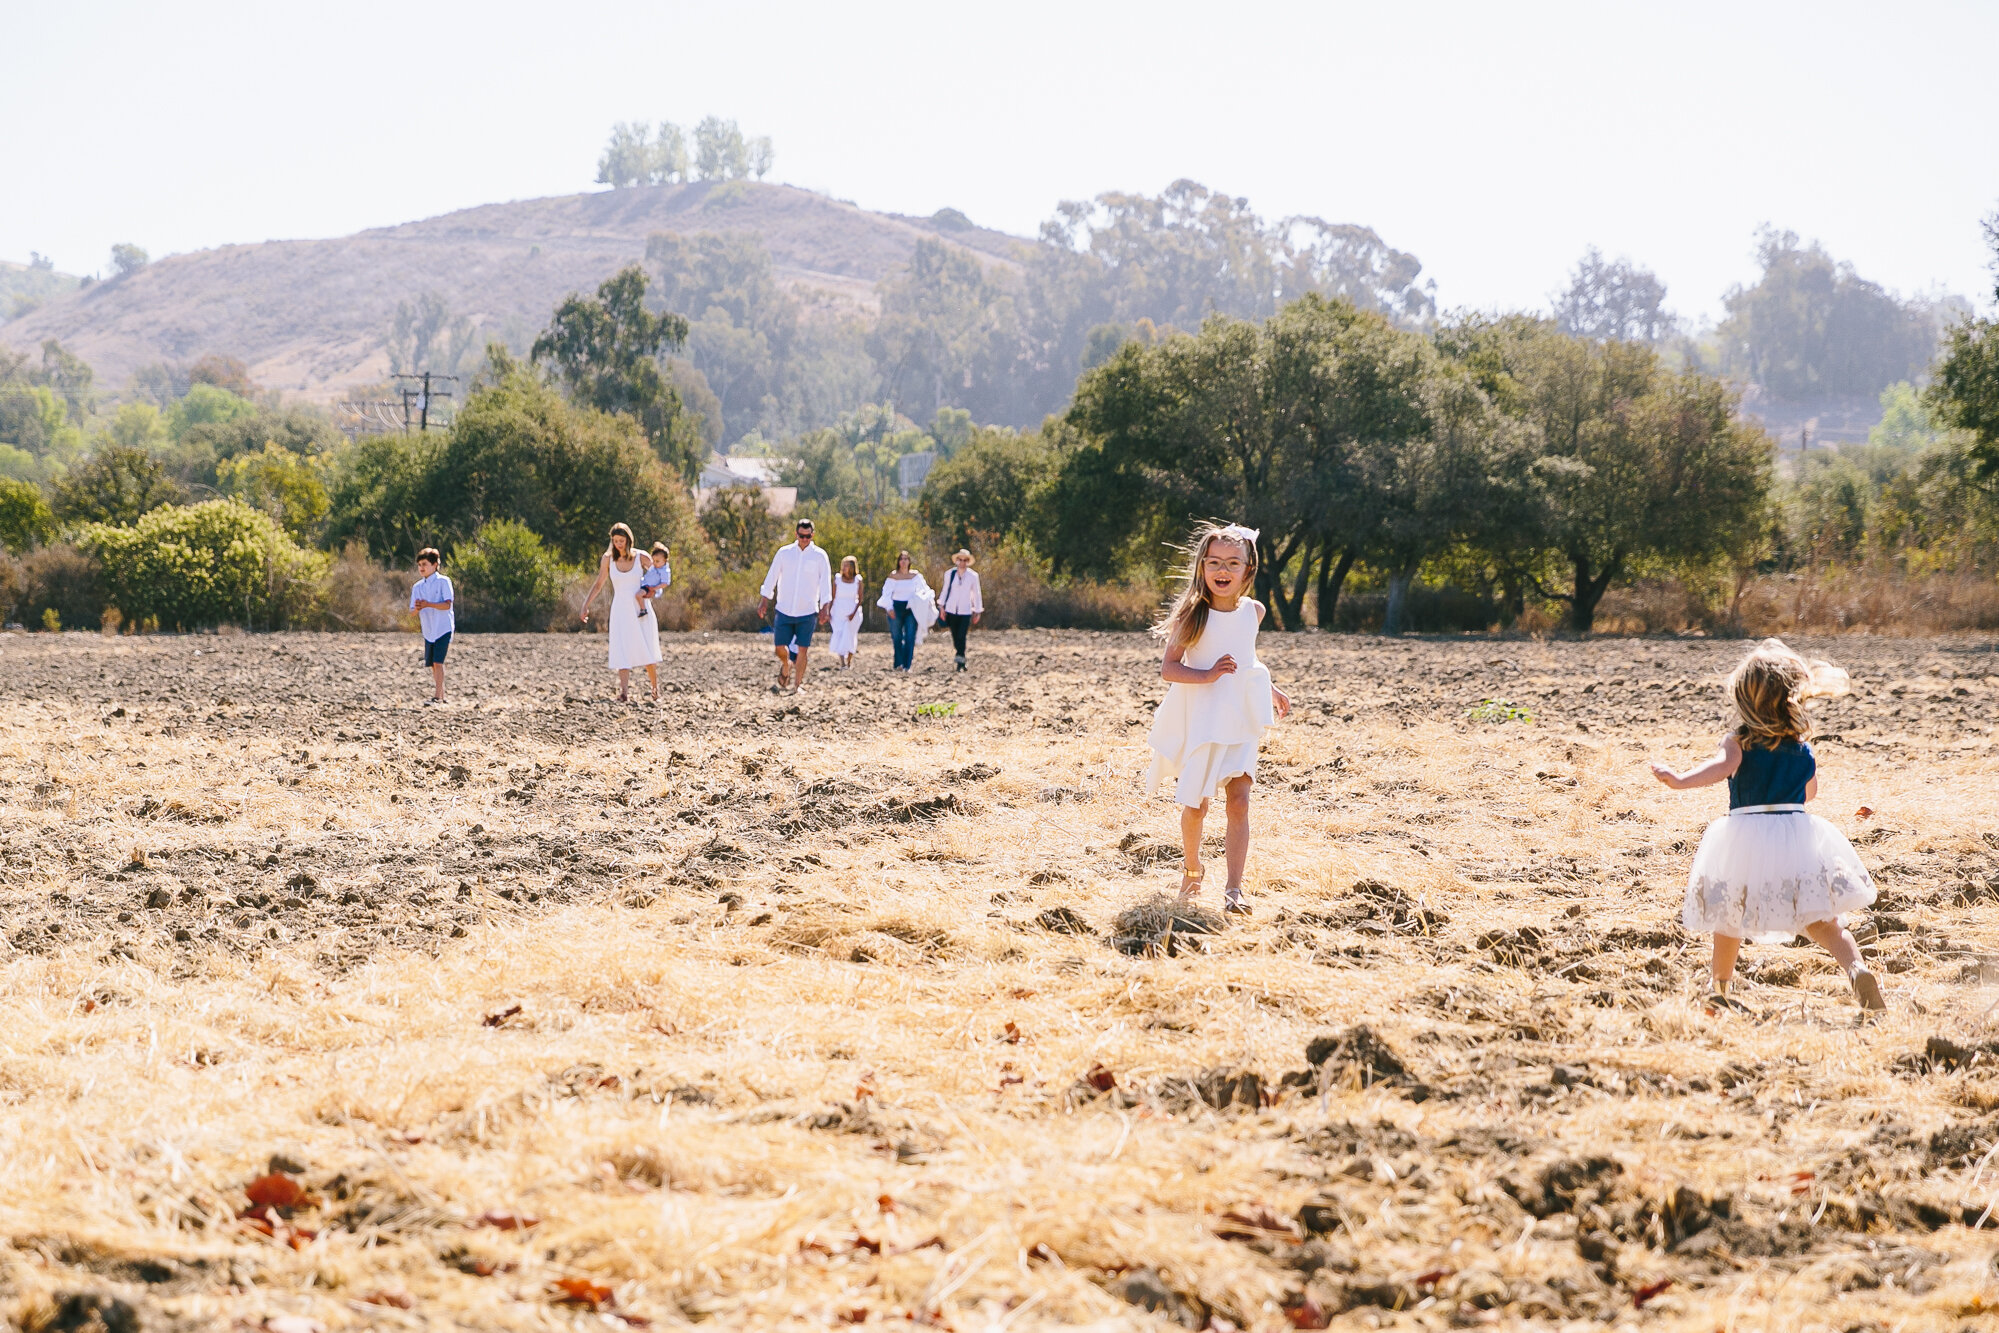 Los_Angeles_Family_Photography_Orange_County_Children_Babies_Field_Farm_Outdoors_Morning_Session_California_Girls_Boys_Kids_Photography-1166.jpg